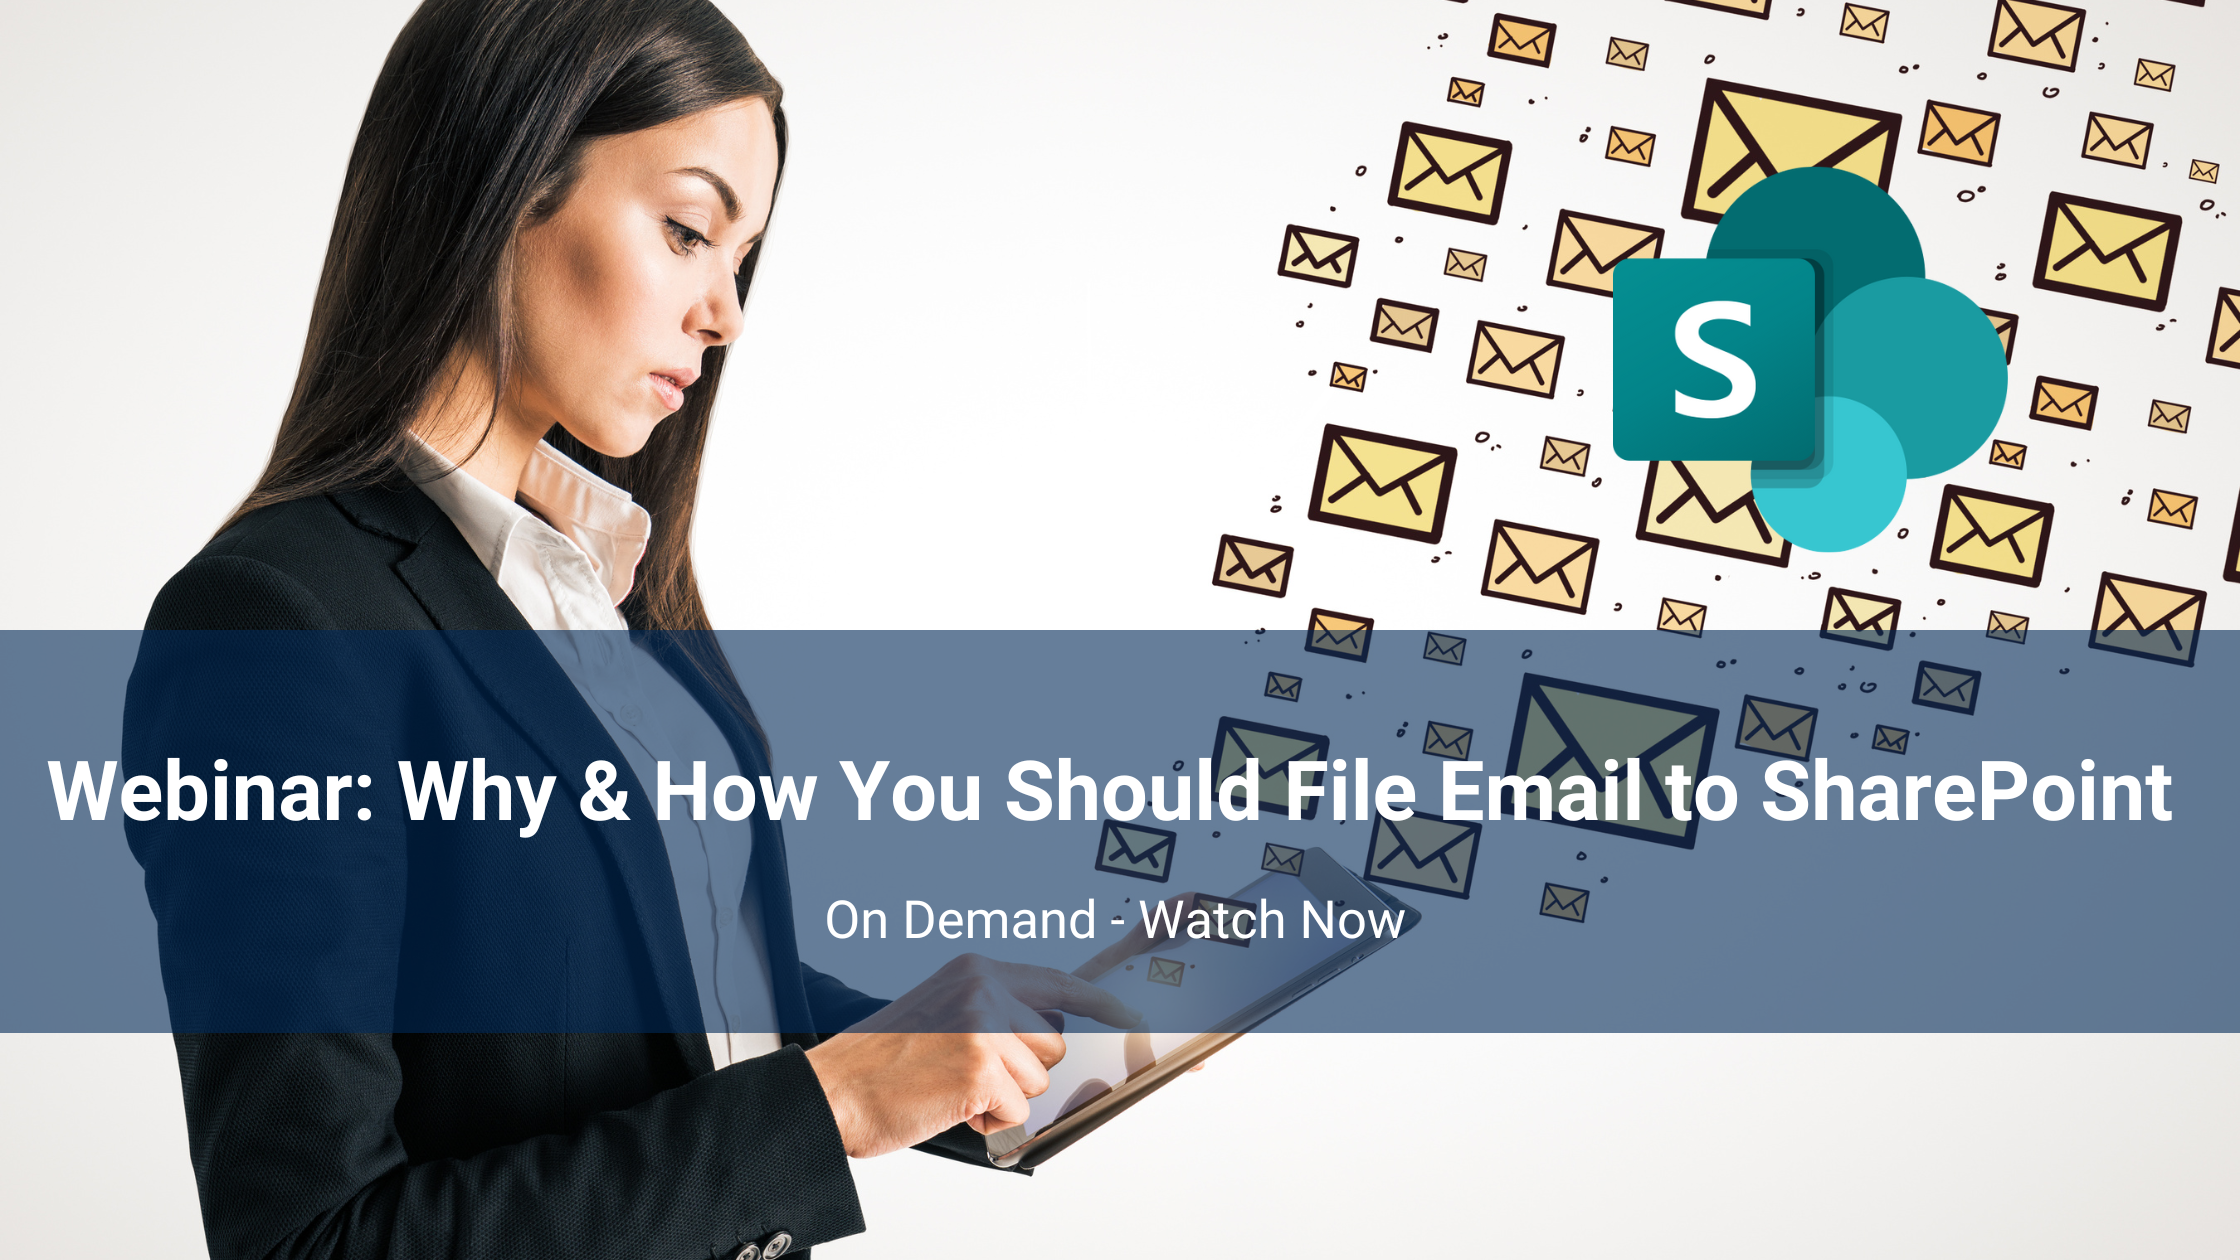 Why & How You Should File Email to SharePoint - webinar image